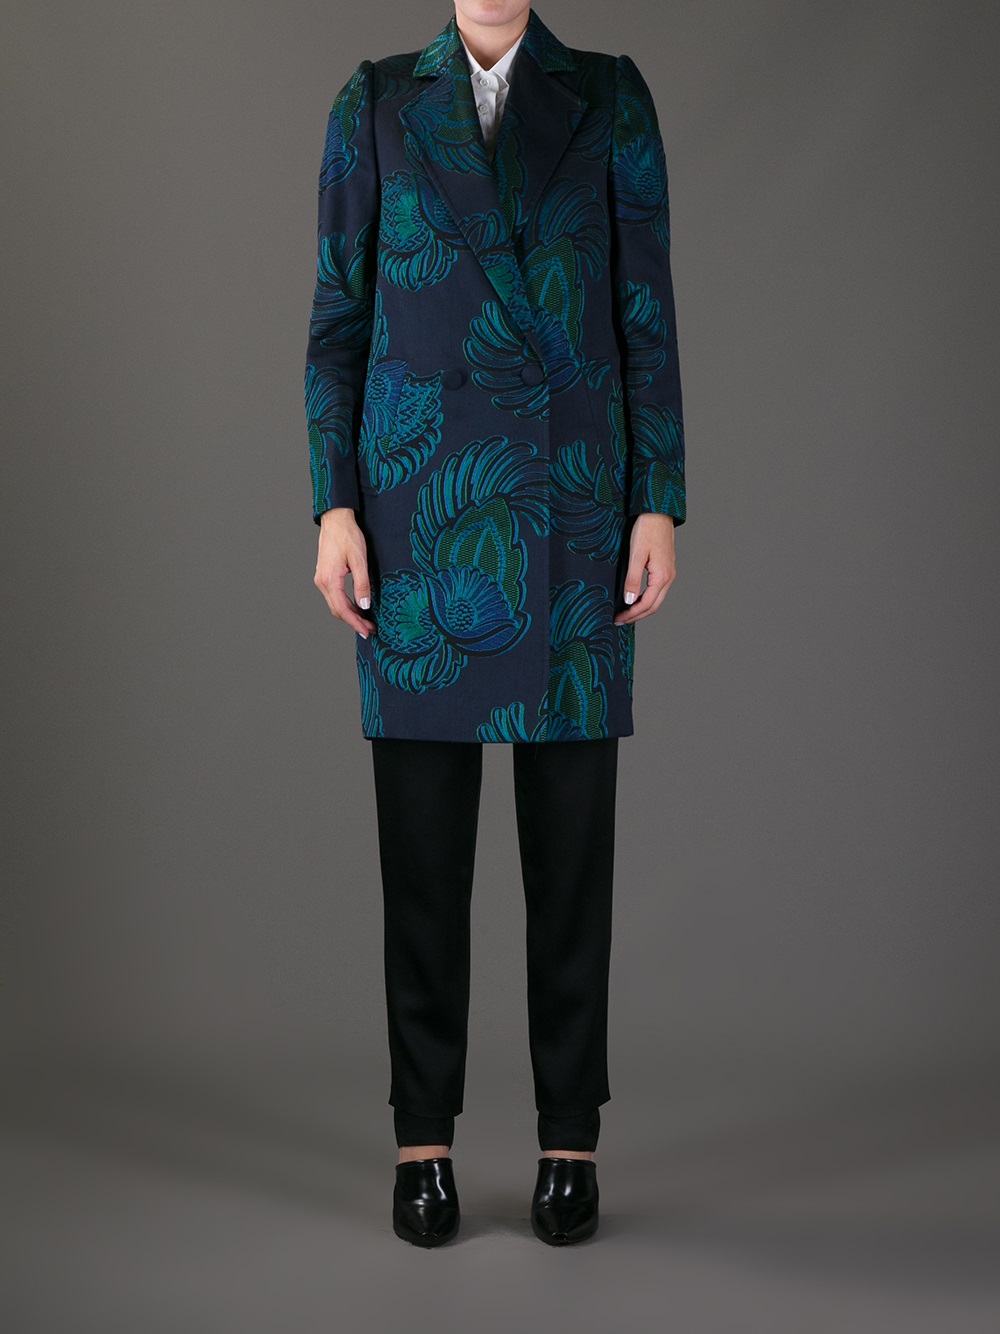 Lyst - Marc by marc jacobs Floral Brocade Coat in Blue